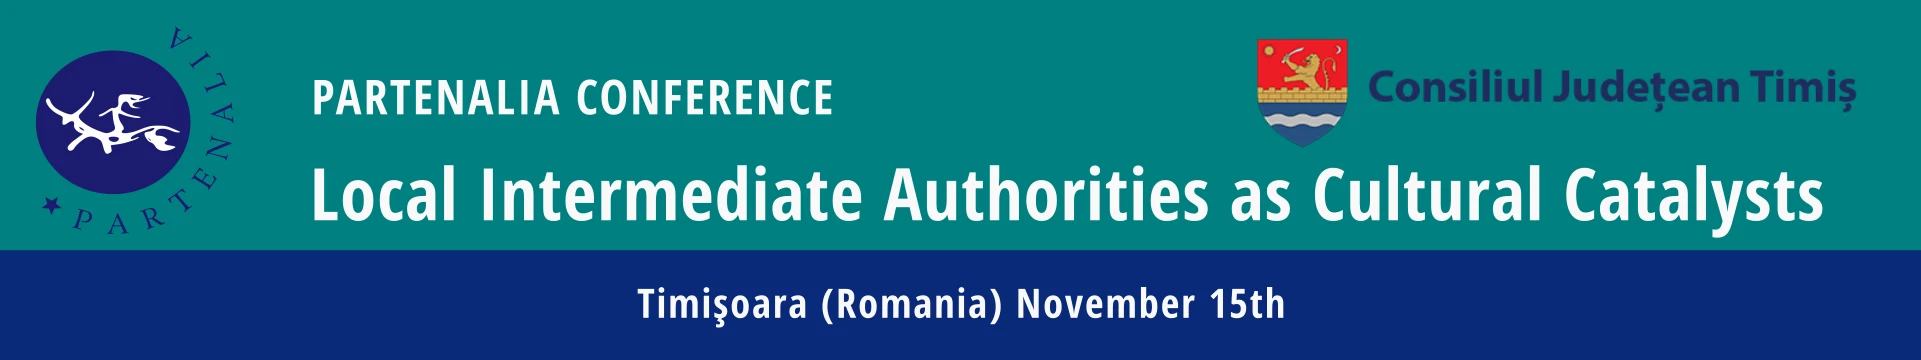 Conference: Local Intermediate Authorities as Cultural Catalysts
Timişoara November 15th